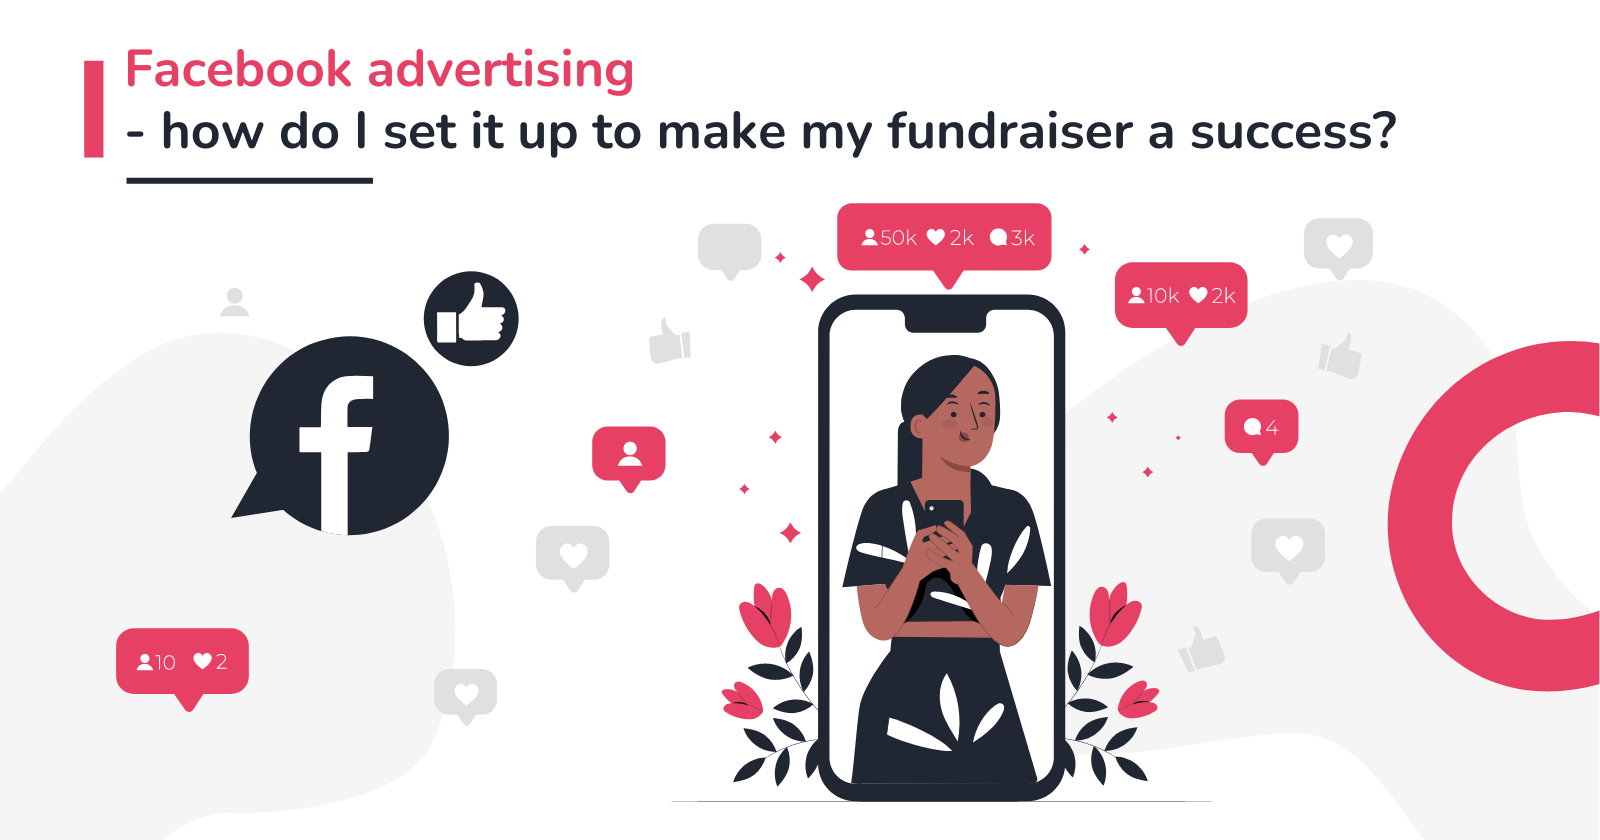 Facebook advertising - how do I set it up to make my fundraiser a success?